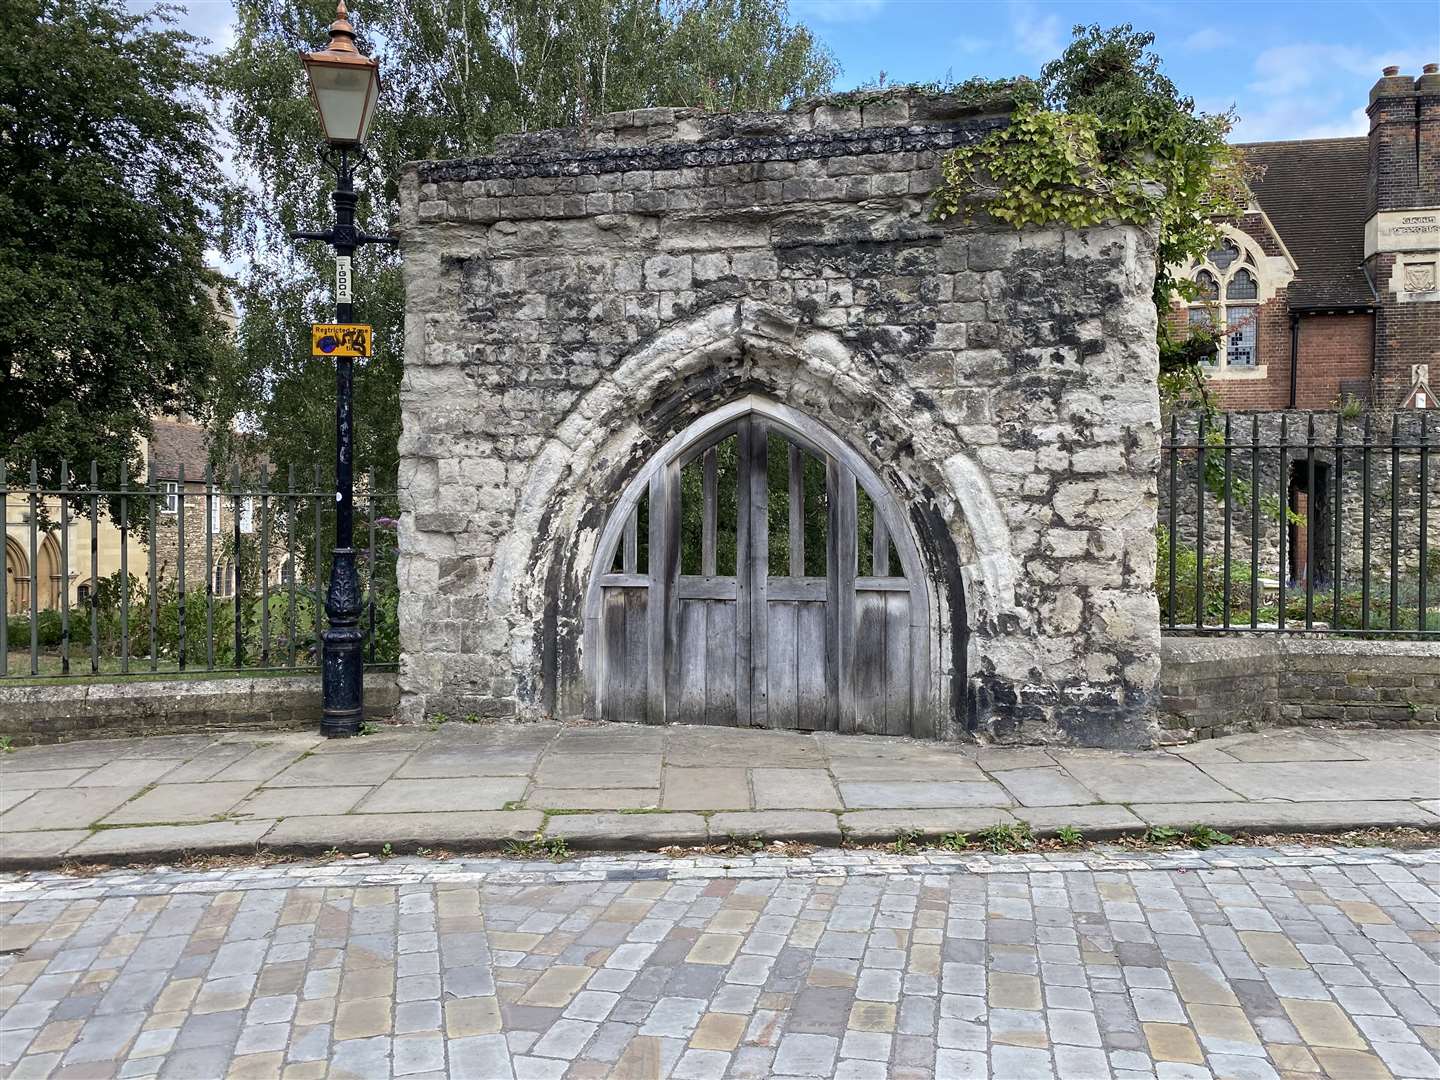 Work is now due to start in September to repair the Bishop's Gate which will see the stones, which have been in storage, returned in the same order